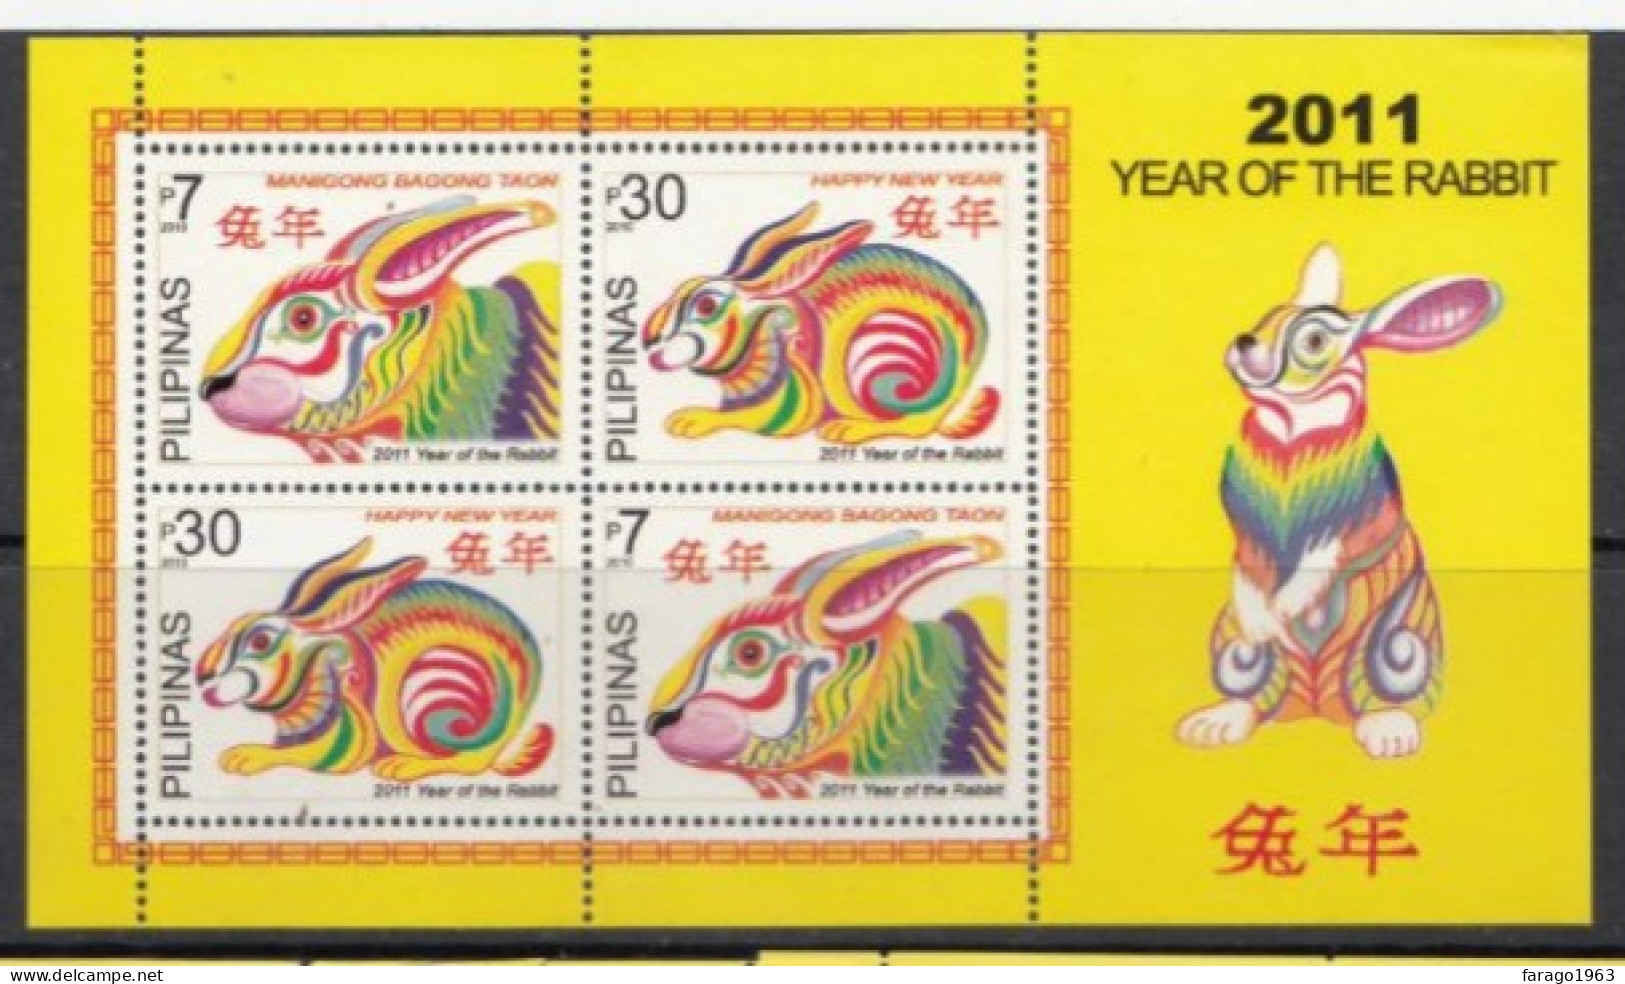 2010 Philippines Year Of The Rabbit Souvenir Sheet  MNH - Philippines